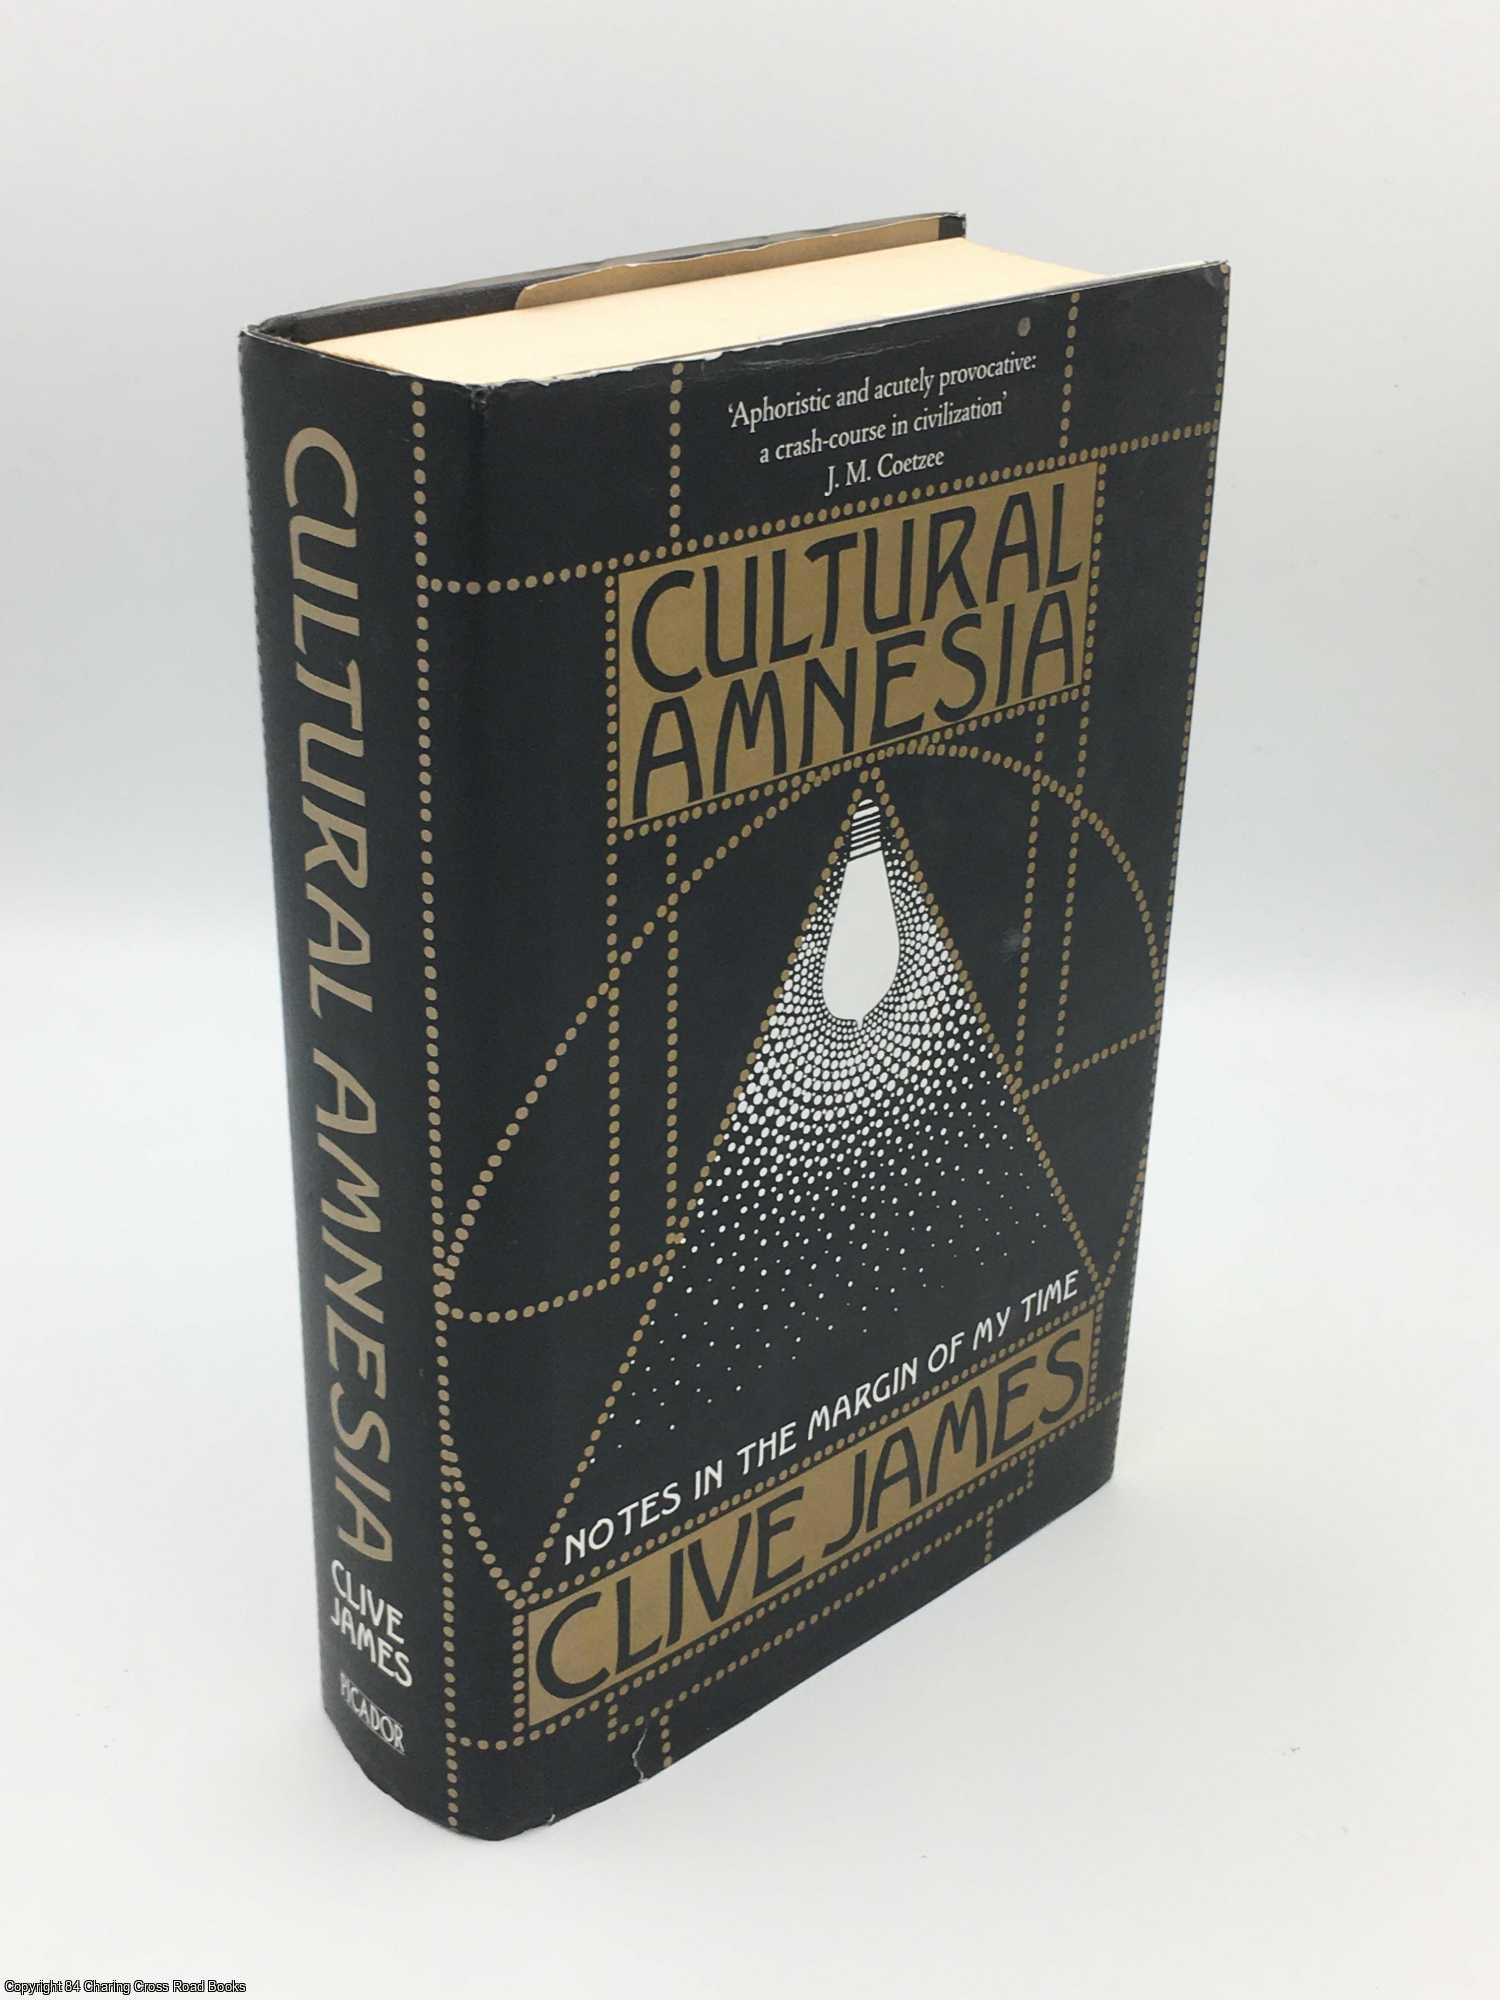 James, Clive - Cultural Amnesia: Notes in the margin of my time